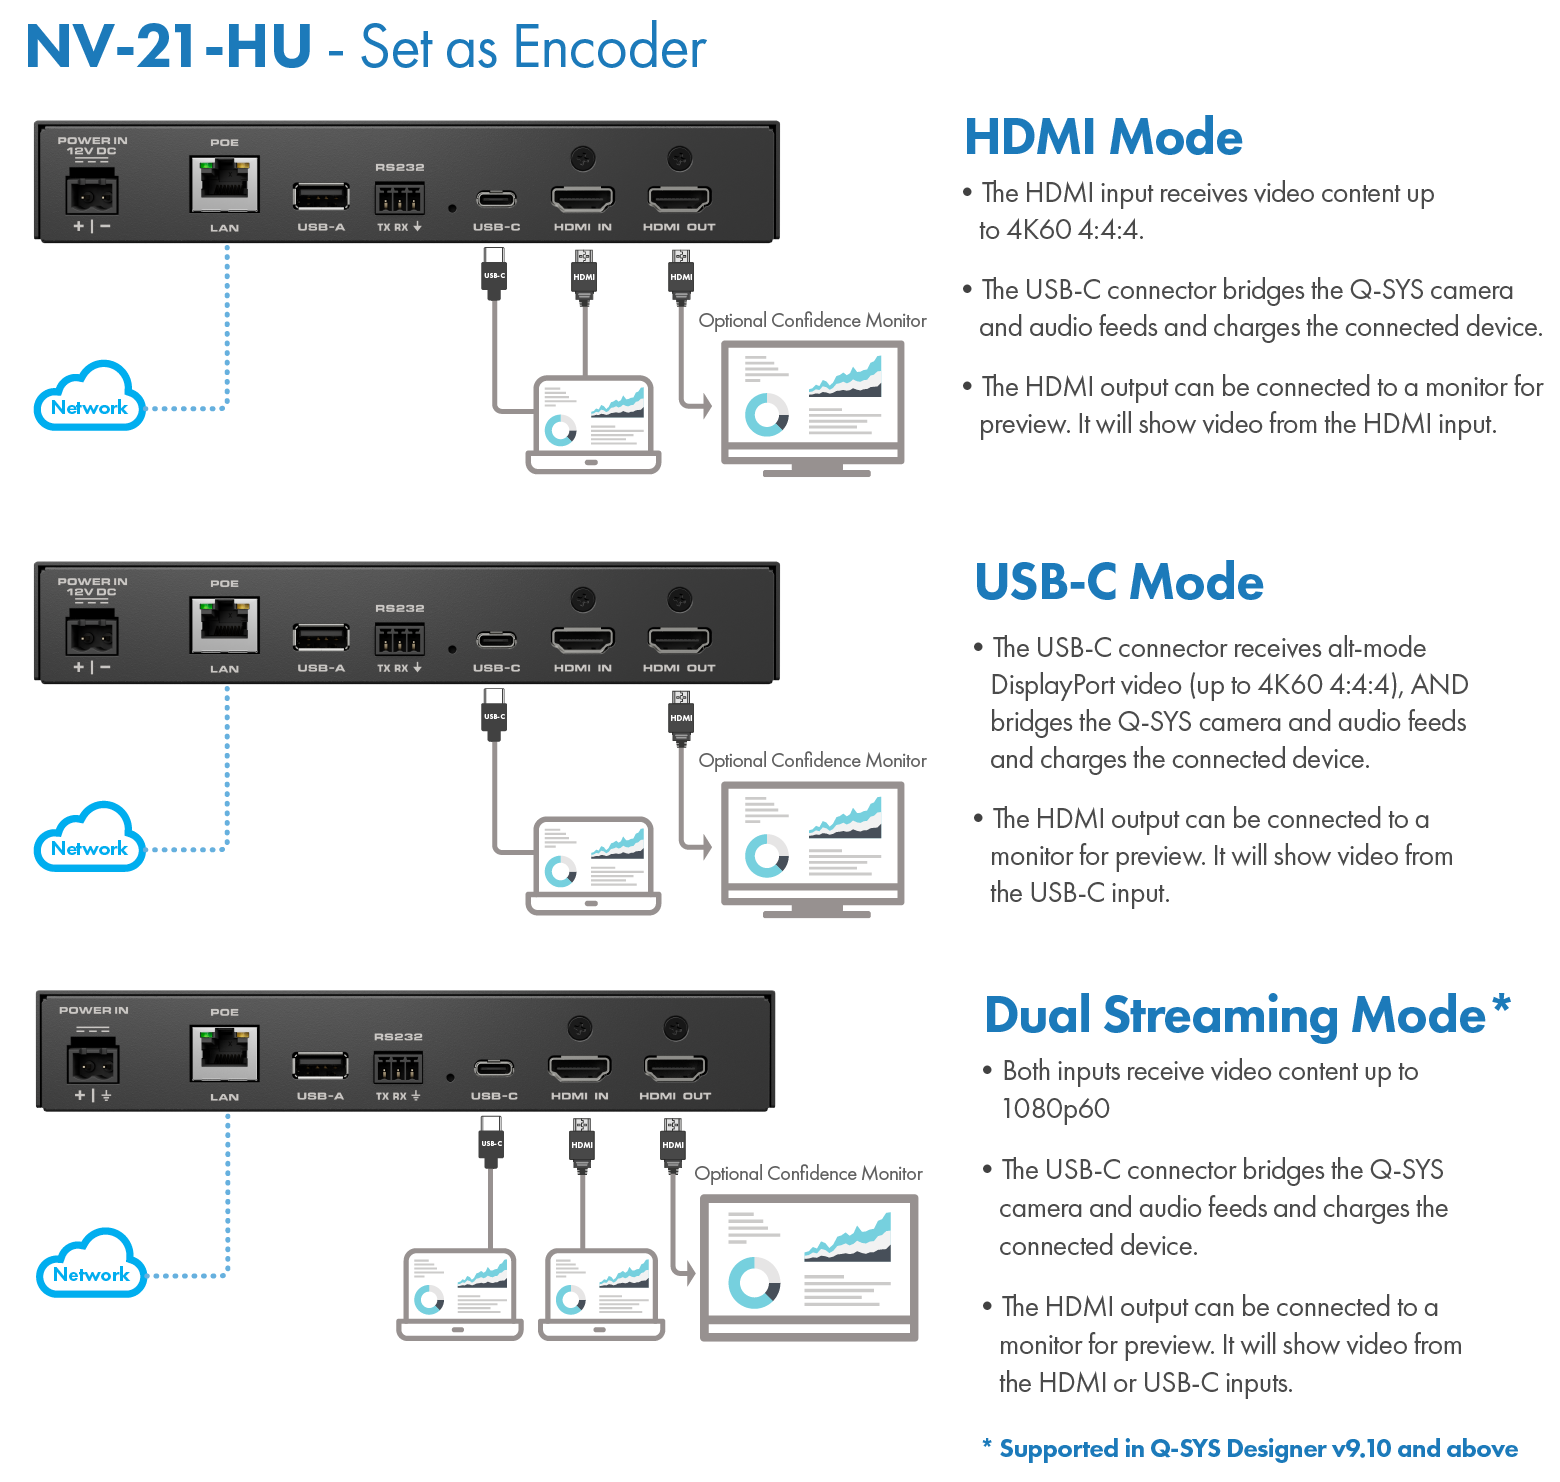 Diagram showing the wiring of an NV-21-HU set up as an encoder in three modes: HDMI, USB-C, and Dual Streaming